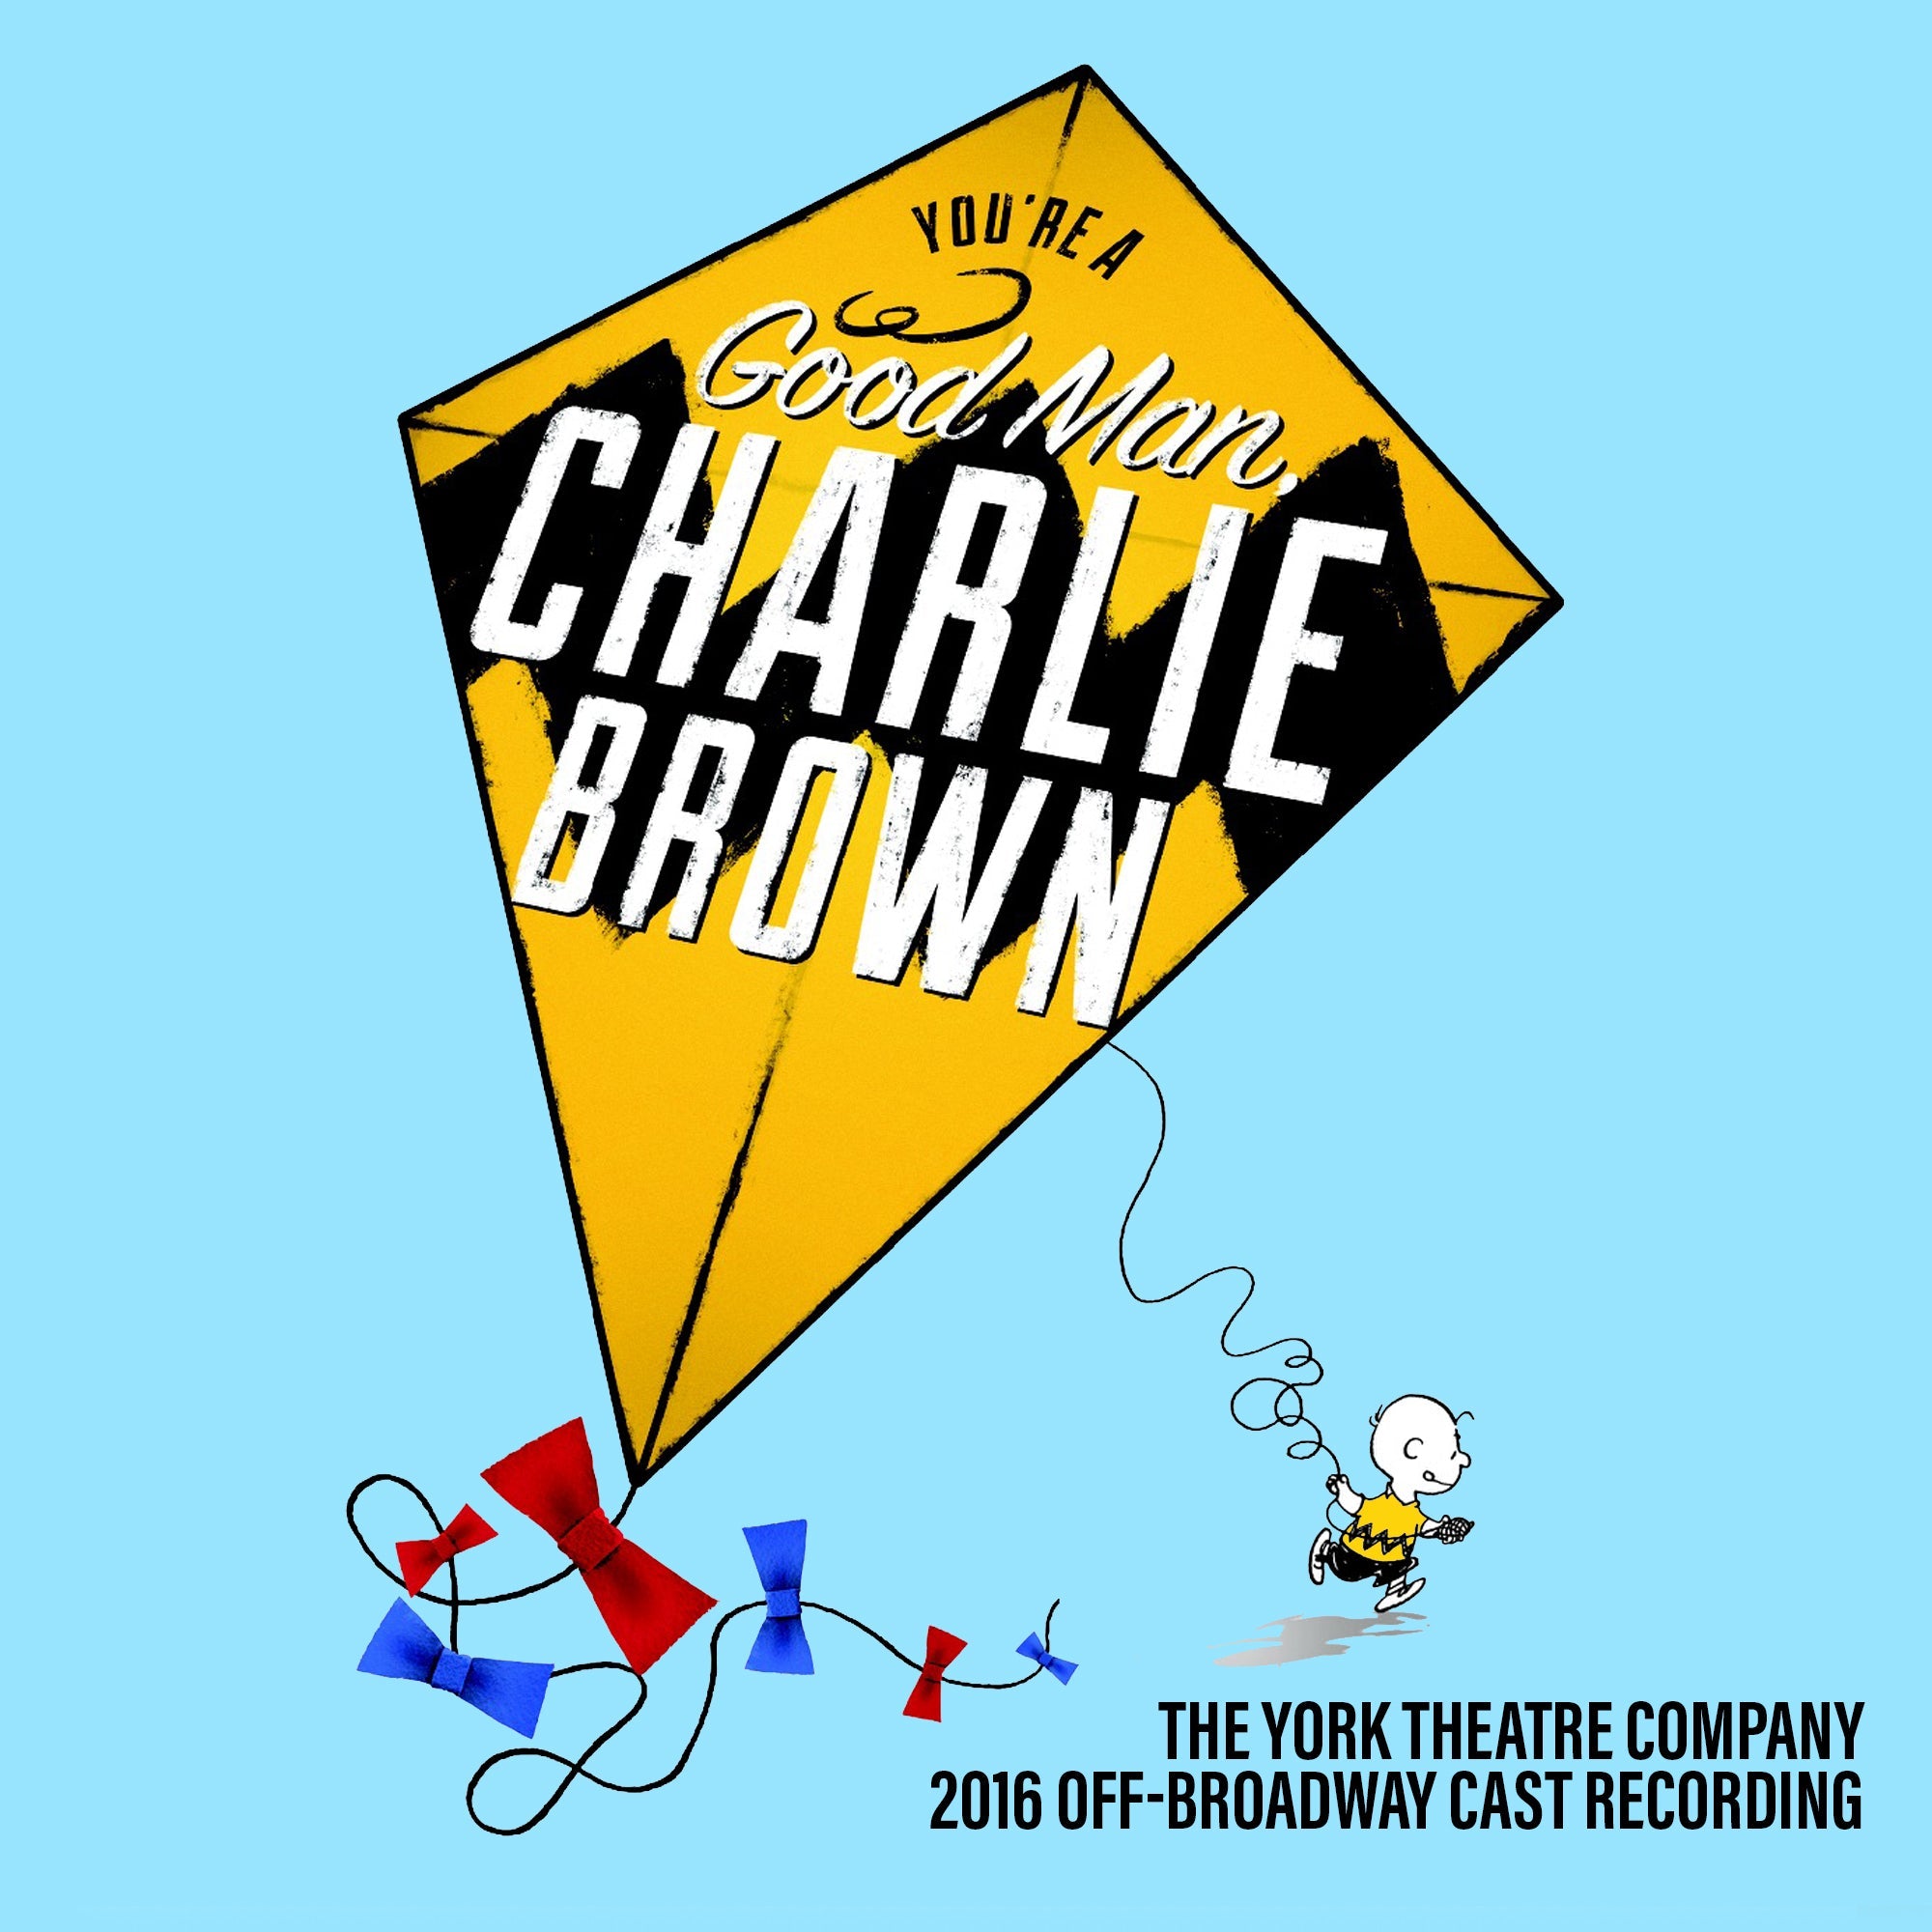 You're a Good Man, Charlie Brown (2016 Off-Broadway Cast Recording) [MP3]